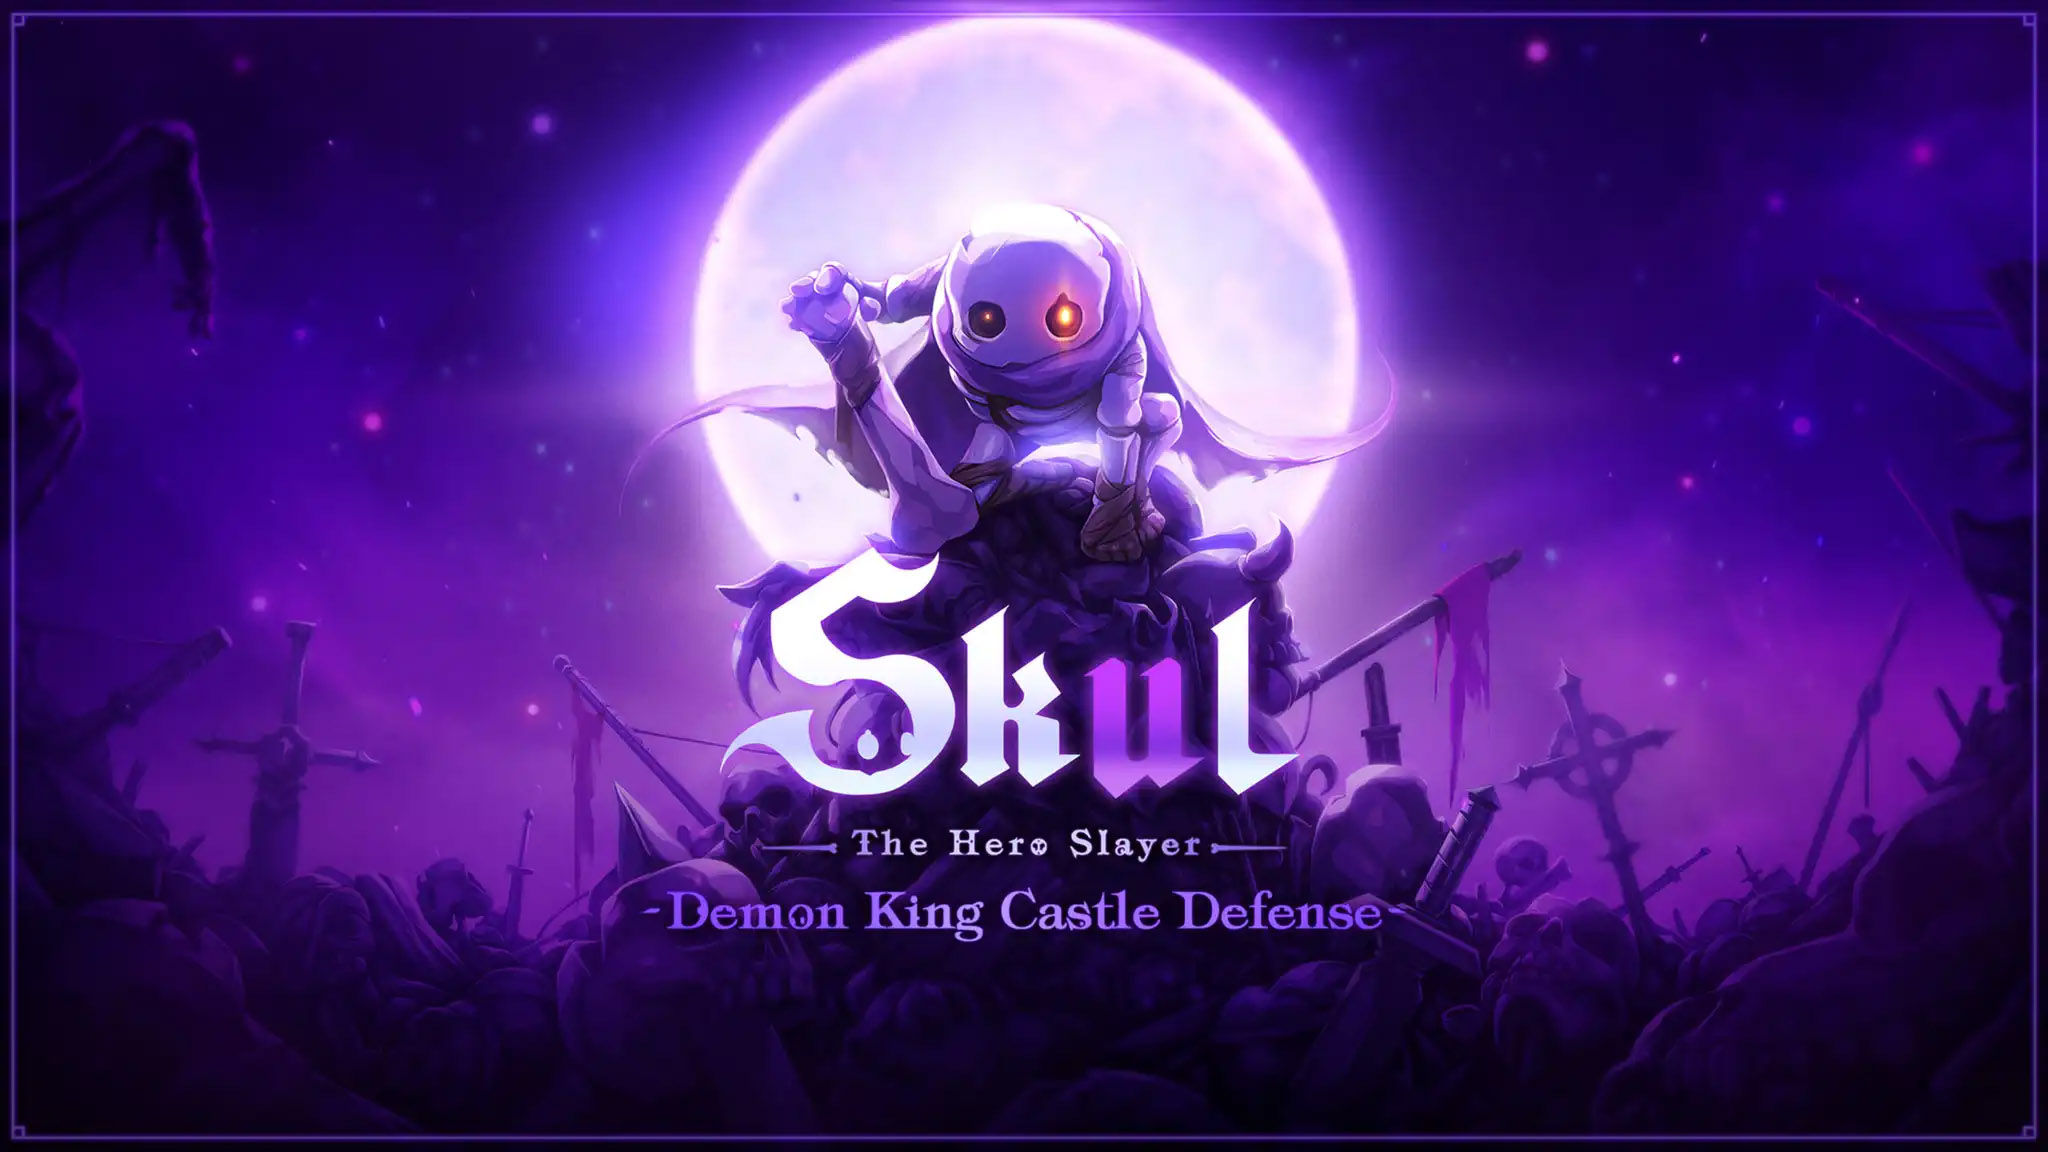 An attack on the Demon King’s castle by a heroic band of adventurers has seen all but one of its denizens captured and imprisoned. Now, as a lowly skeleton Skul, you must save your demonic brethren. This 2D action platformer boasts rogue-like features, with an ever-changing map and a growing arsenal of abilities, each with its own unique attack range, speed and power. Equip two types at a time to fit your play style, and switch out during combat to find the best strategy to defeat your foes. 